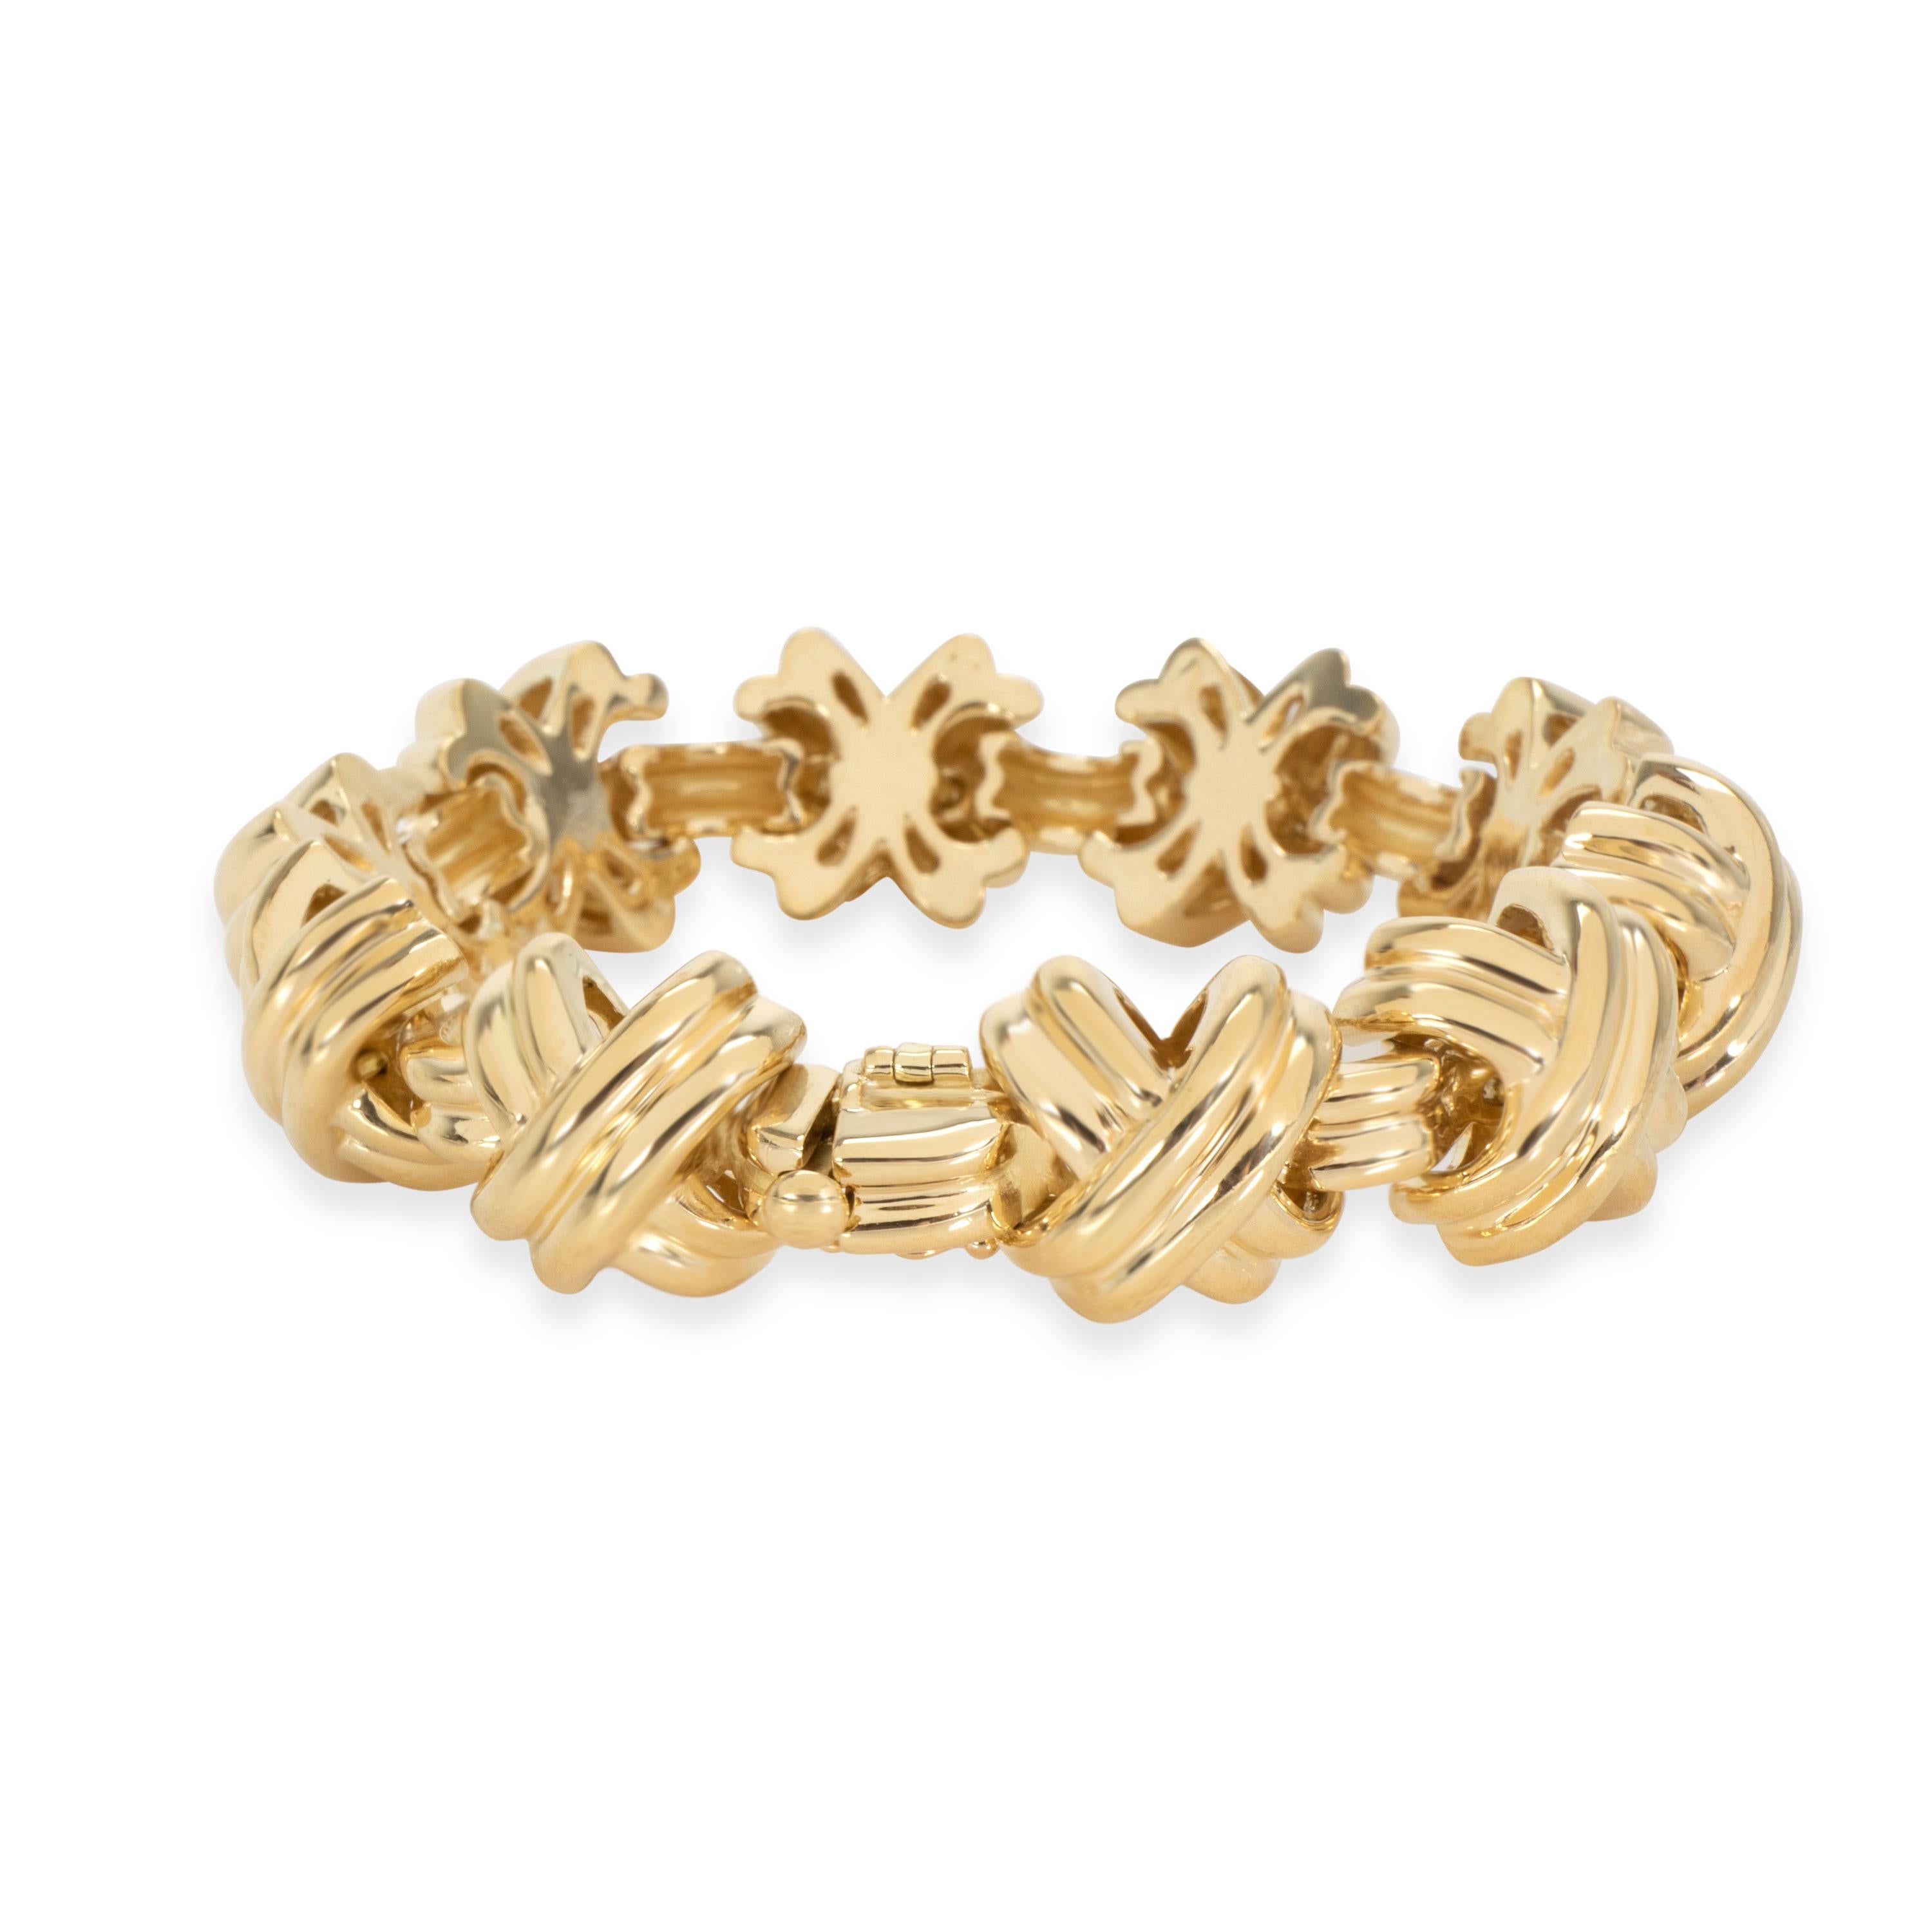 Tiffany & Co. X Bracelet in 18K Yellow Gold 

PRIMARY DETAILS 
SKU: 104340 
Listing Title: Tiffany & Co. X Bracelet in 18K Yellow Gold 
Condition Description: Retails for 15000 USD. In excellent condition and recently polished. Bracelet is 7.5